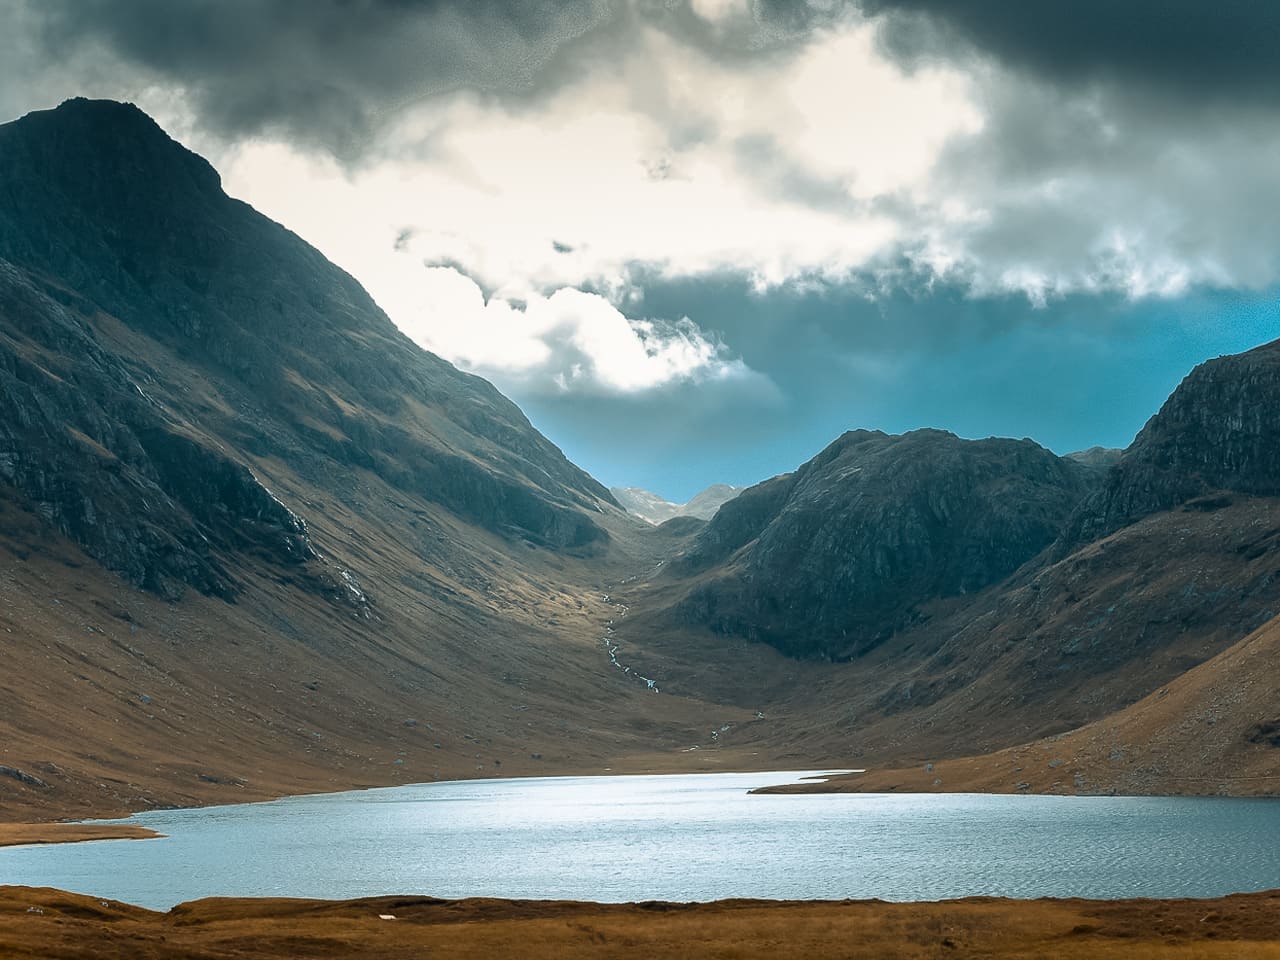 Sights and surroundings in Scotland